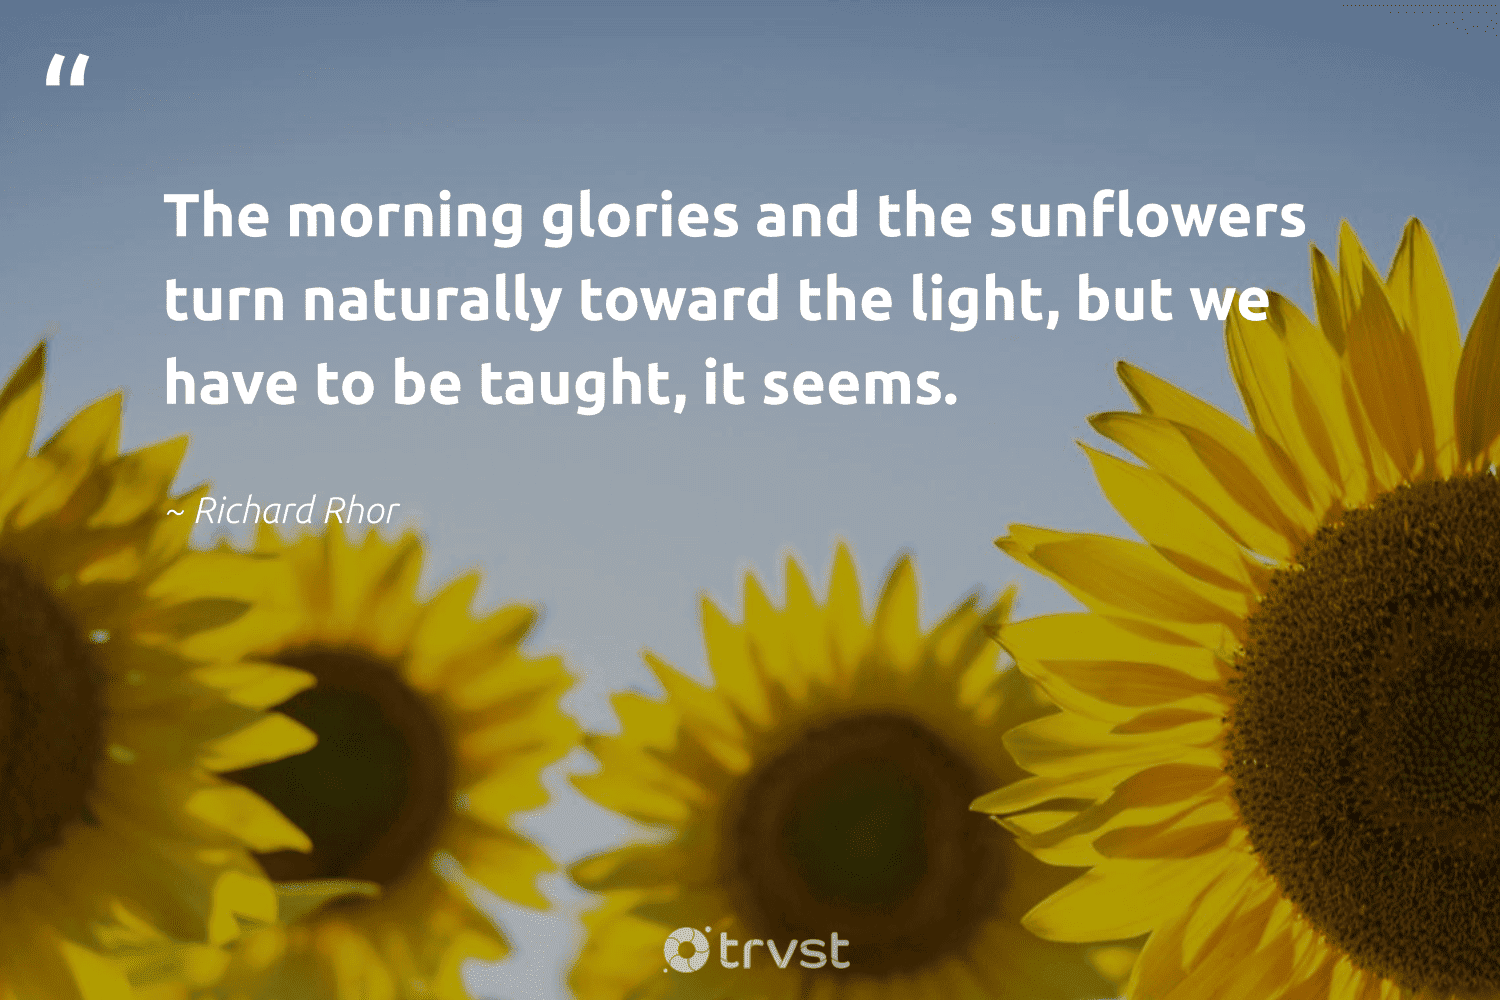 48 Sunflower Quotes to Brighten Up Your Day and Inspire a Smile